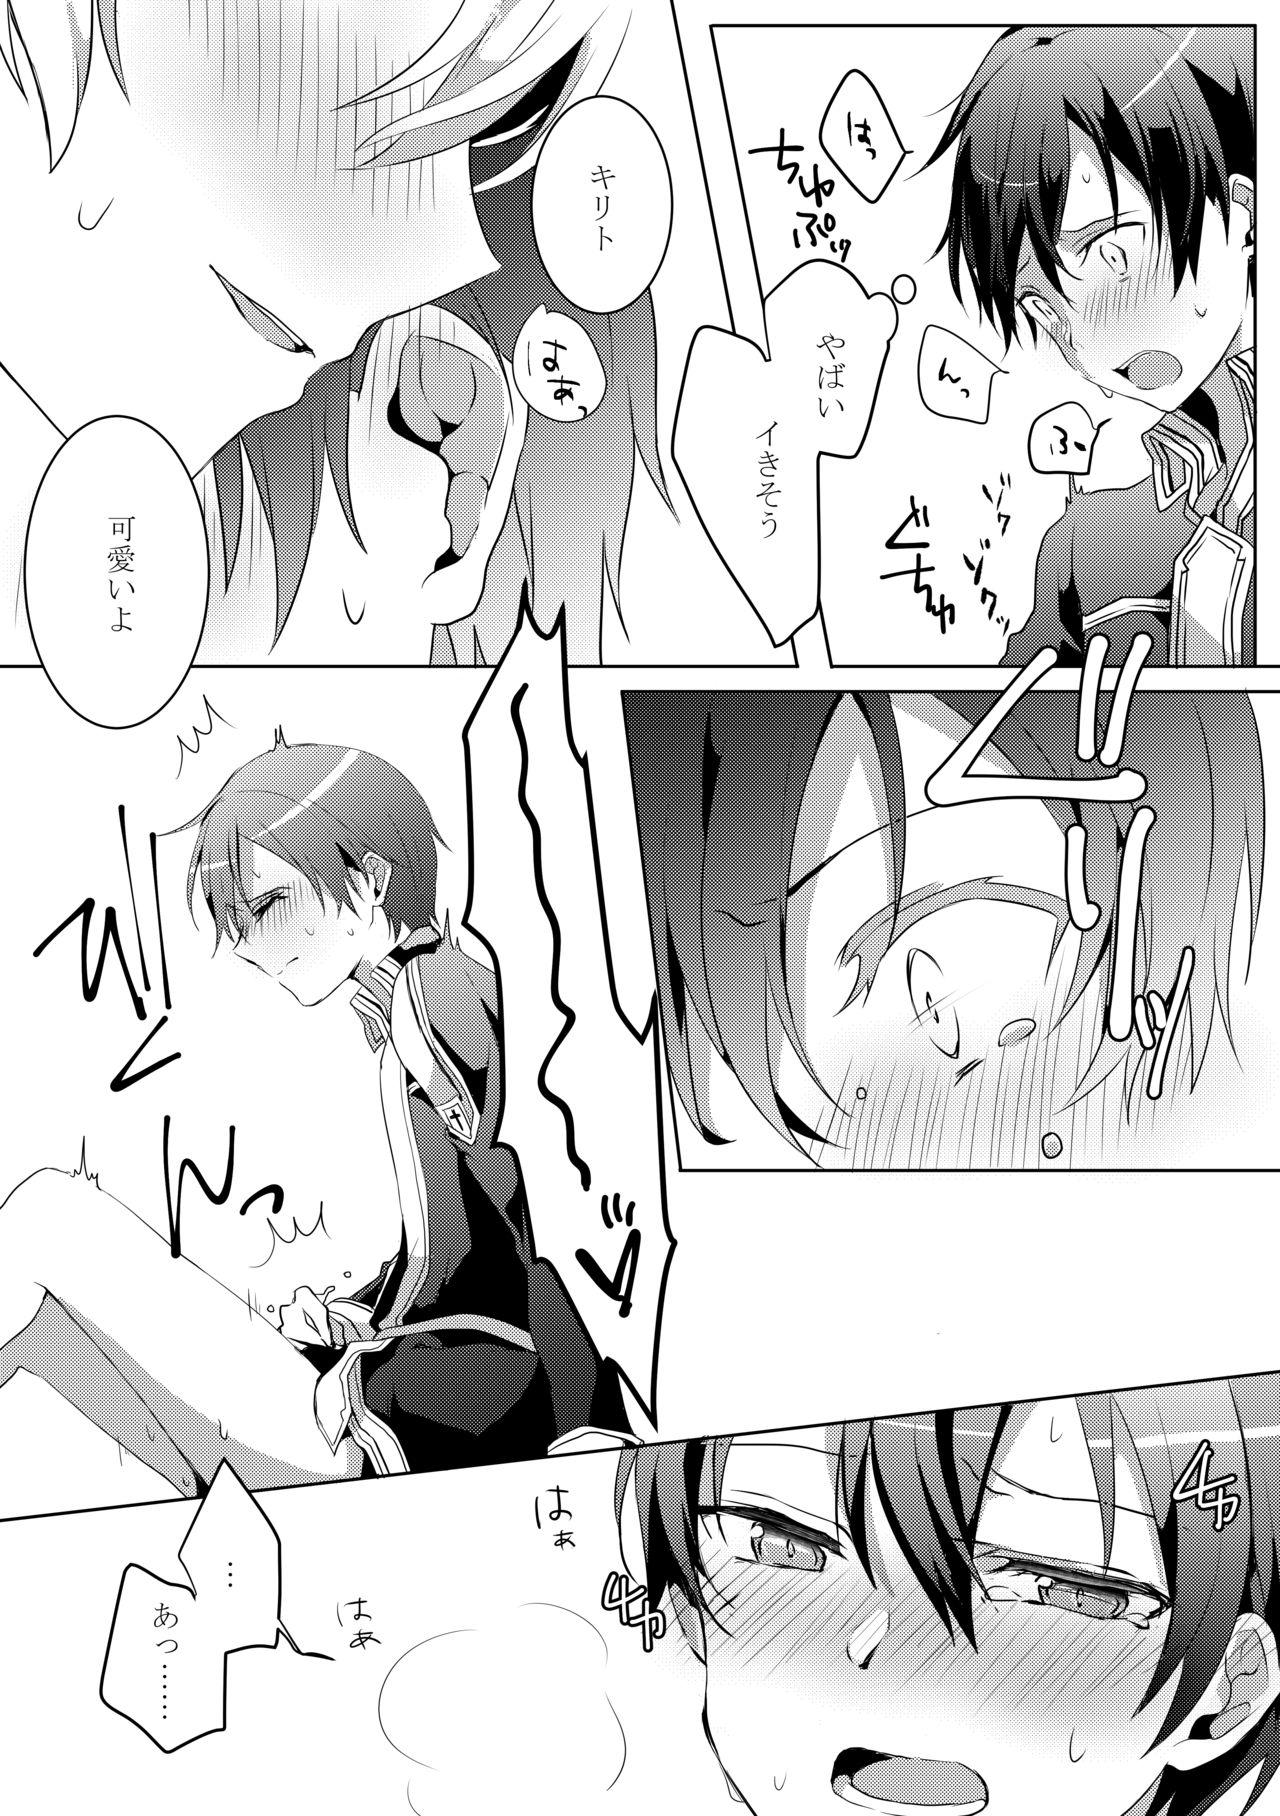 Publico キリトくんが0721 - Sword art online Lick - Page 9